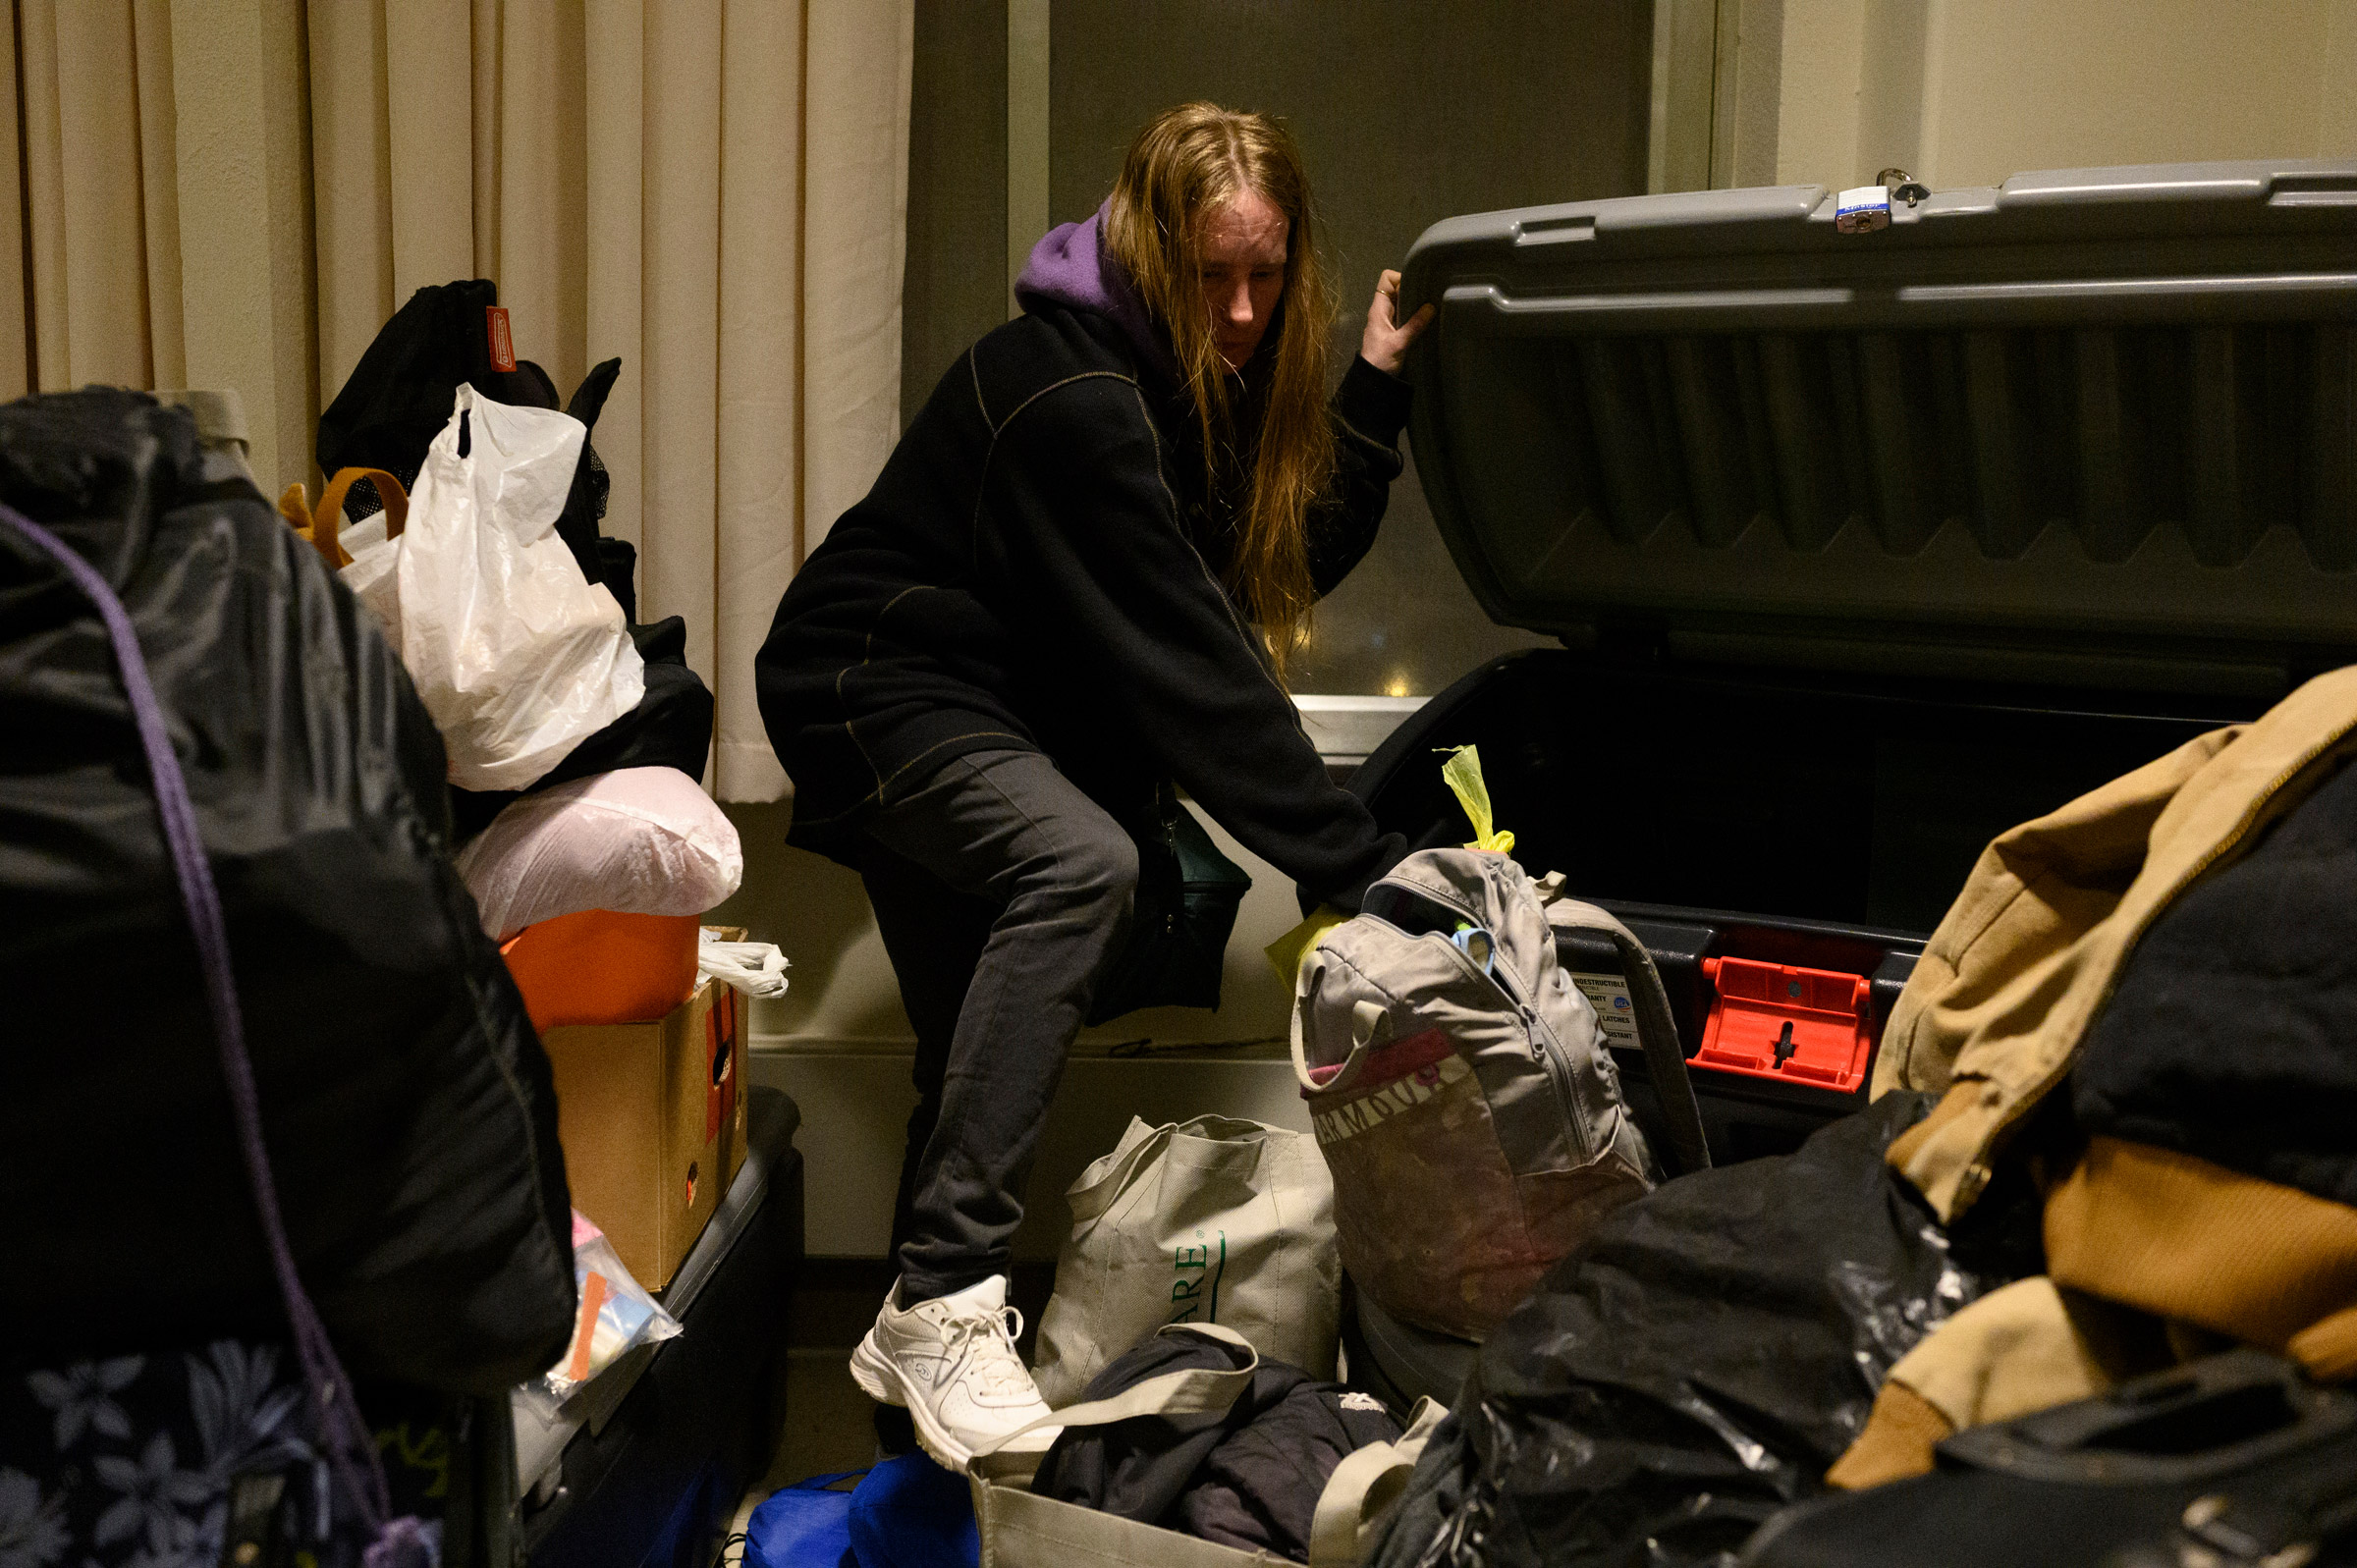 Dylon collects her belongings stored at the Winter Freeze shelter on March. 15 before having to move outside. (Rebecca Kiger for TIME)